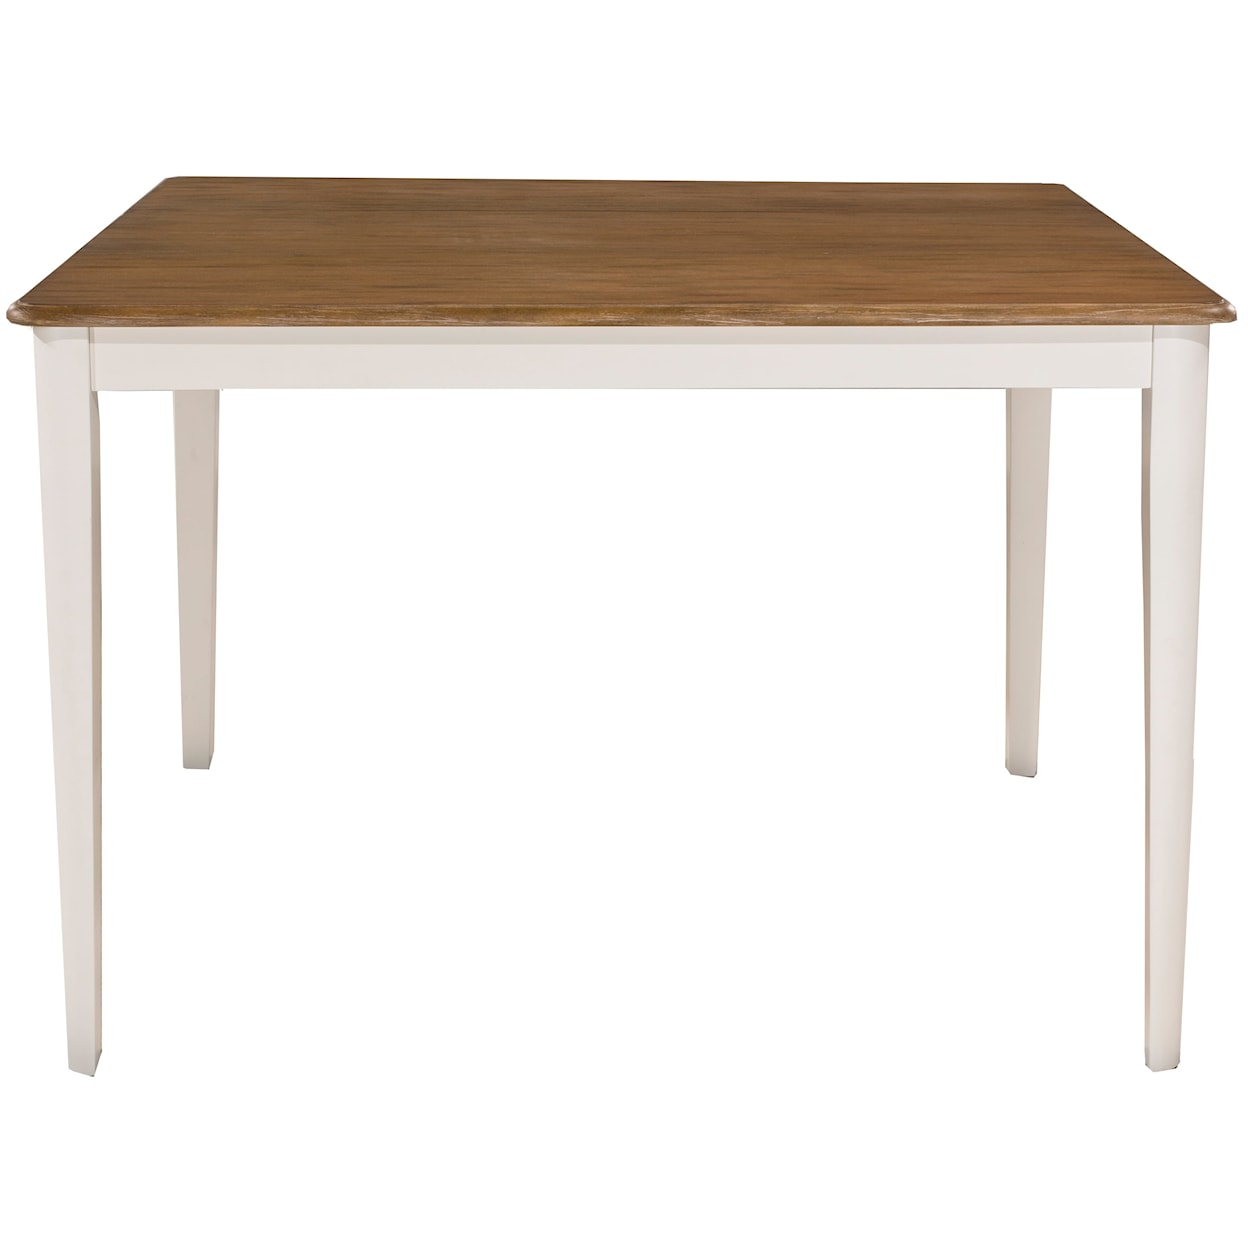 Hillsdale Bayberry Dining Table